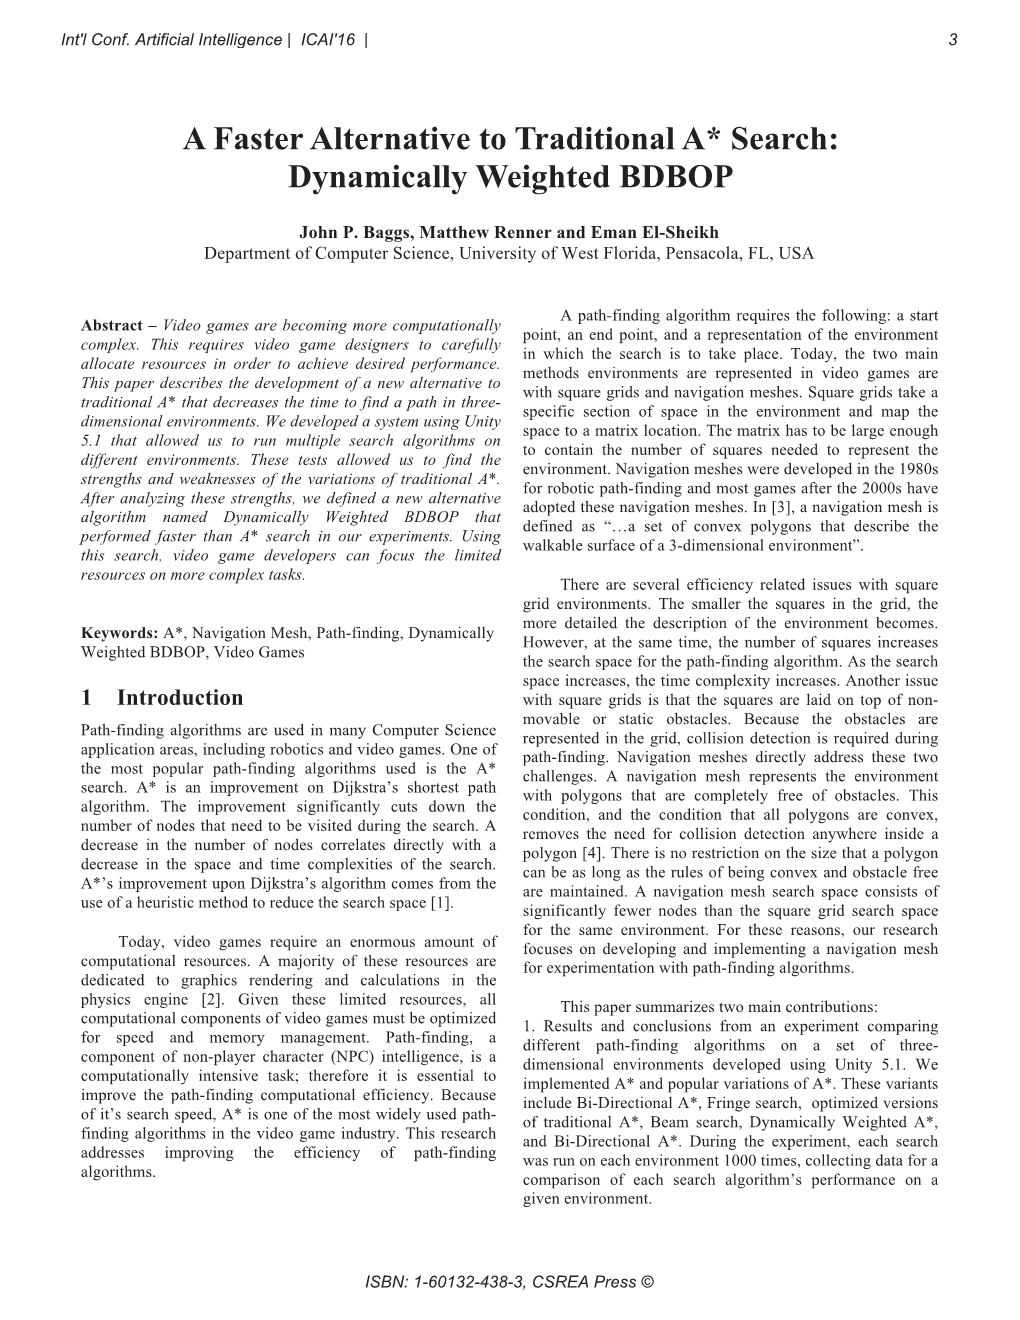 A Faster Alternative to Traditional A* Search: Dynamically Weighted BDBOP